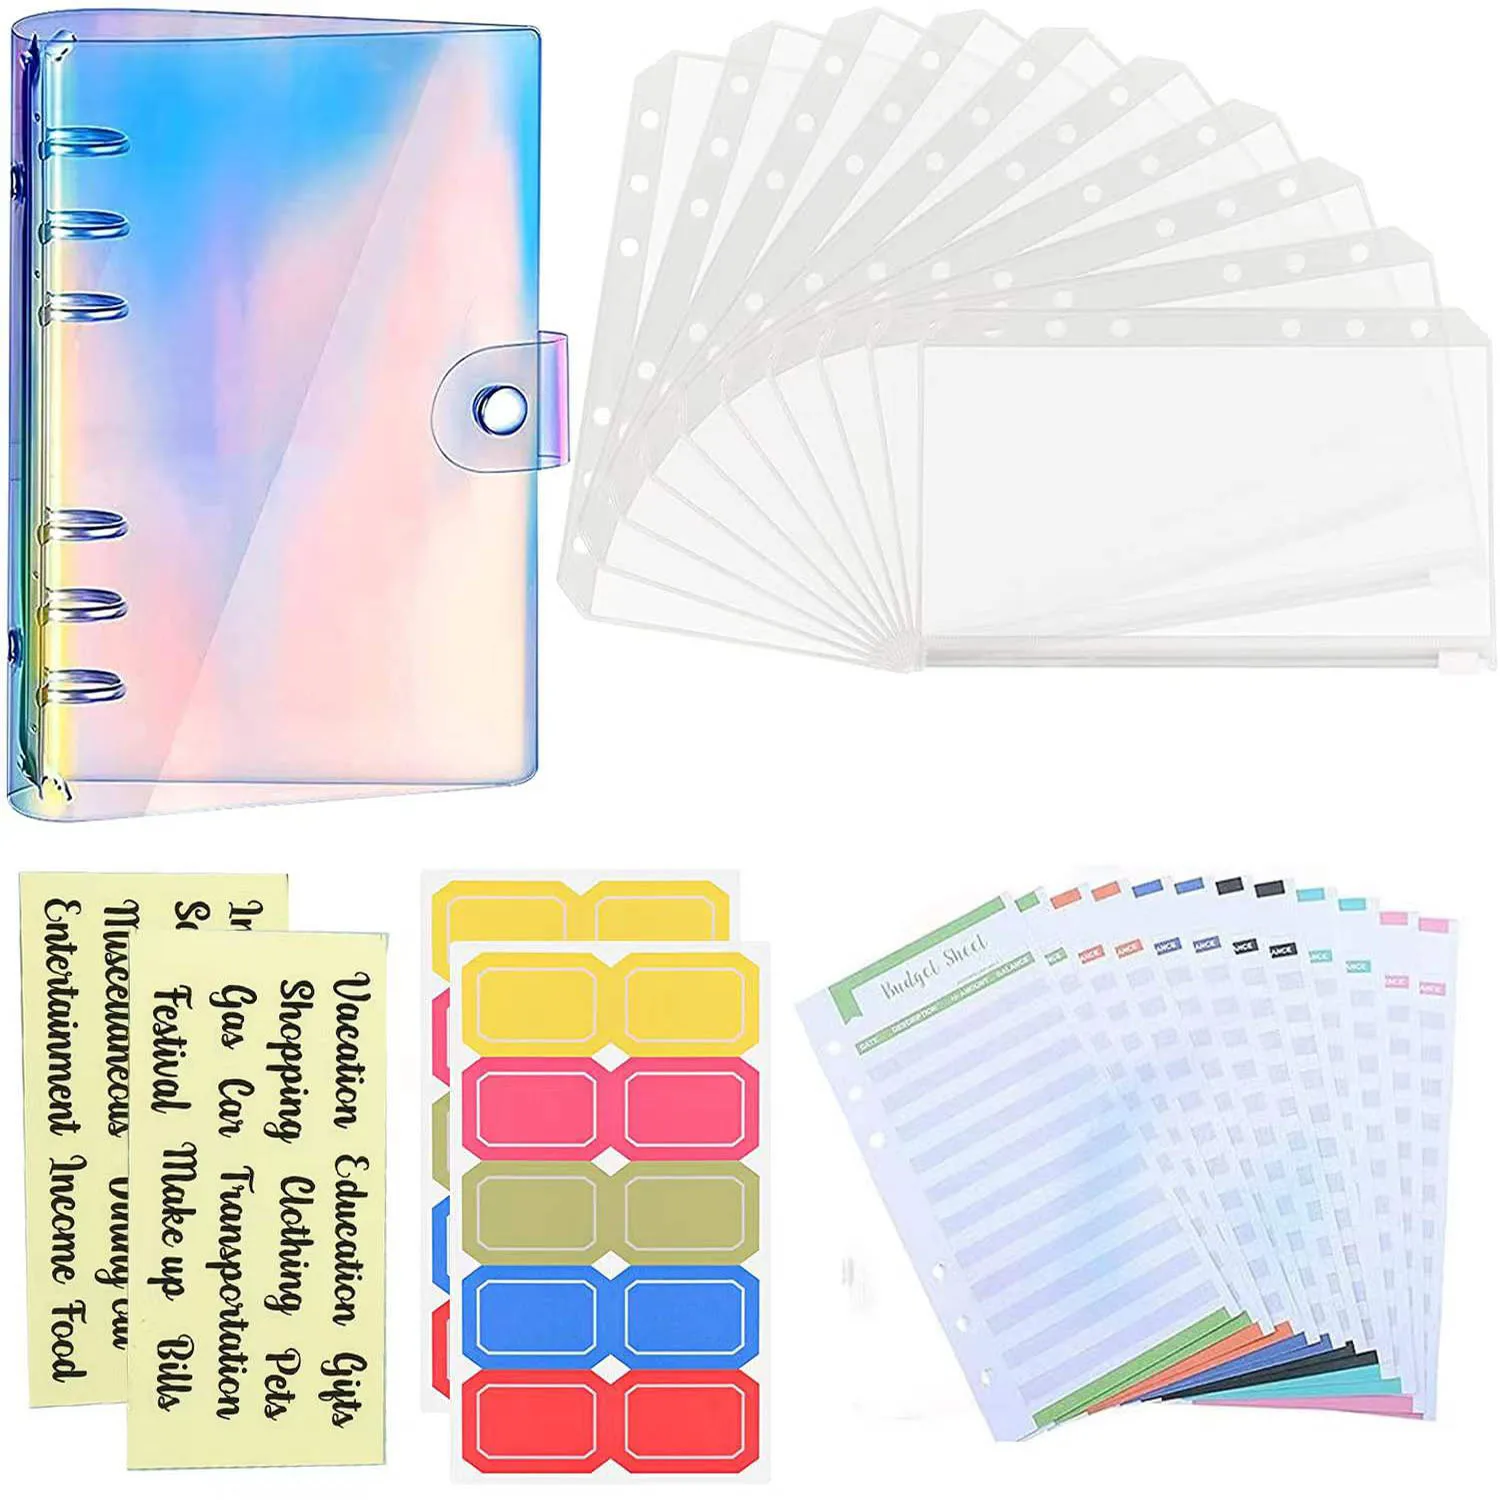 A6 Budget Binder Waterproof Cash Envelopes Notebook Organizer System with 10 Zipper Pockets,12 Budget Sheet and Label Stickers a6 clear soft pvc 6 ring binder cover personal planner organizer with 6pcs a6 cash budget envelopes and 1pcs label sticker